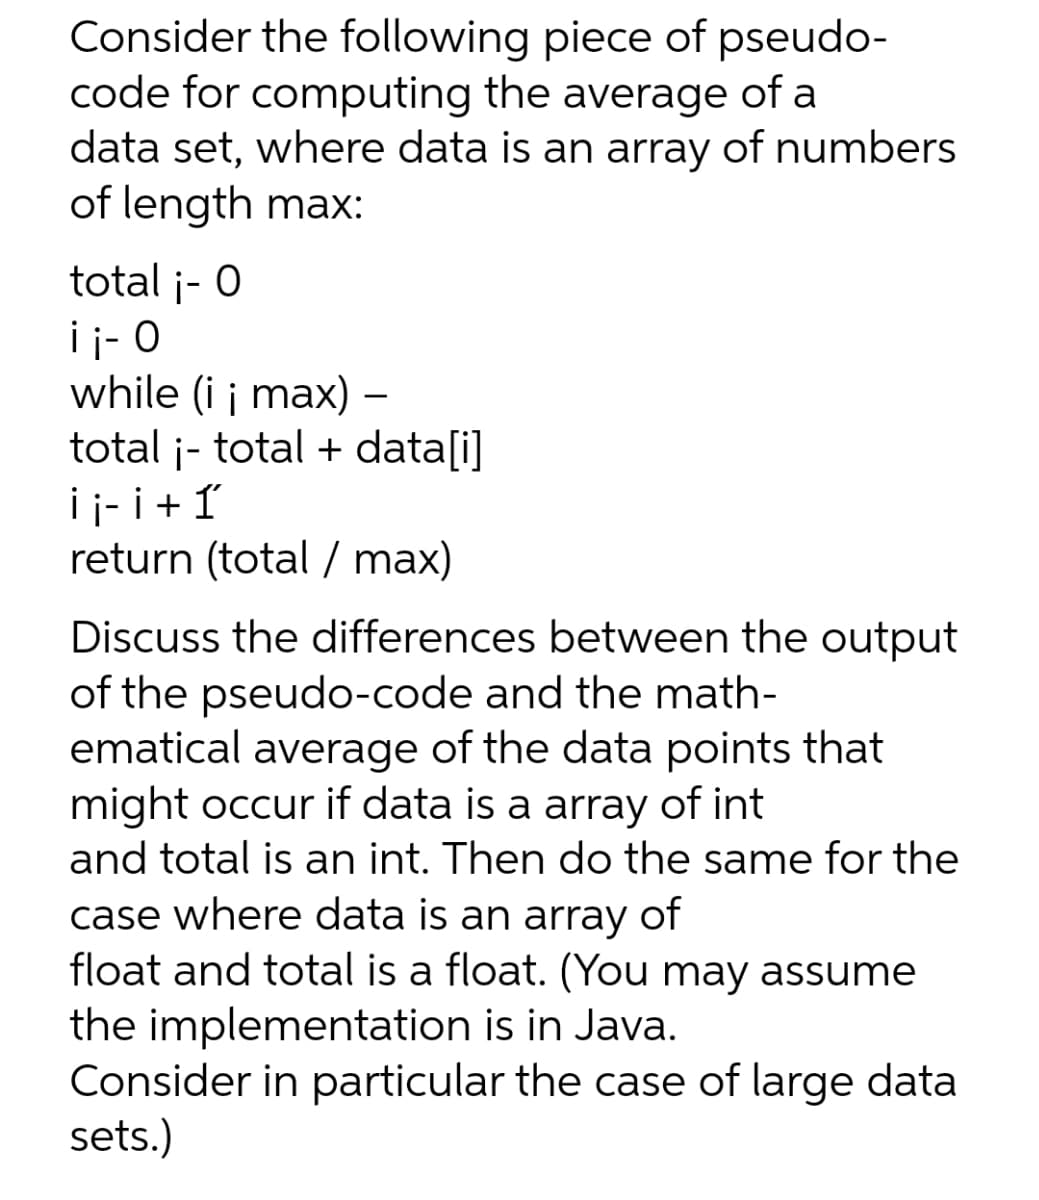 Consider the following piece of pseudo-
code for computing the average of a
data set, where data is an array of numbers
of length max:
total ¡- 0
ii- O
while (i ¡ max) –
total ¡- total + data[i]
¡ ¡- ¡ + 1
return (total / max)
Discuss the differences between the output
of the pseudo-code and the math-
ematical average of the data points that
might occur if data is a array of int
and total is an int. Then do the same for the
case where data is an array of
float and total is a float. (You may assume
the implementation is in Java.
Consider in particular the case of large data
sets.)